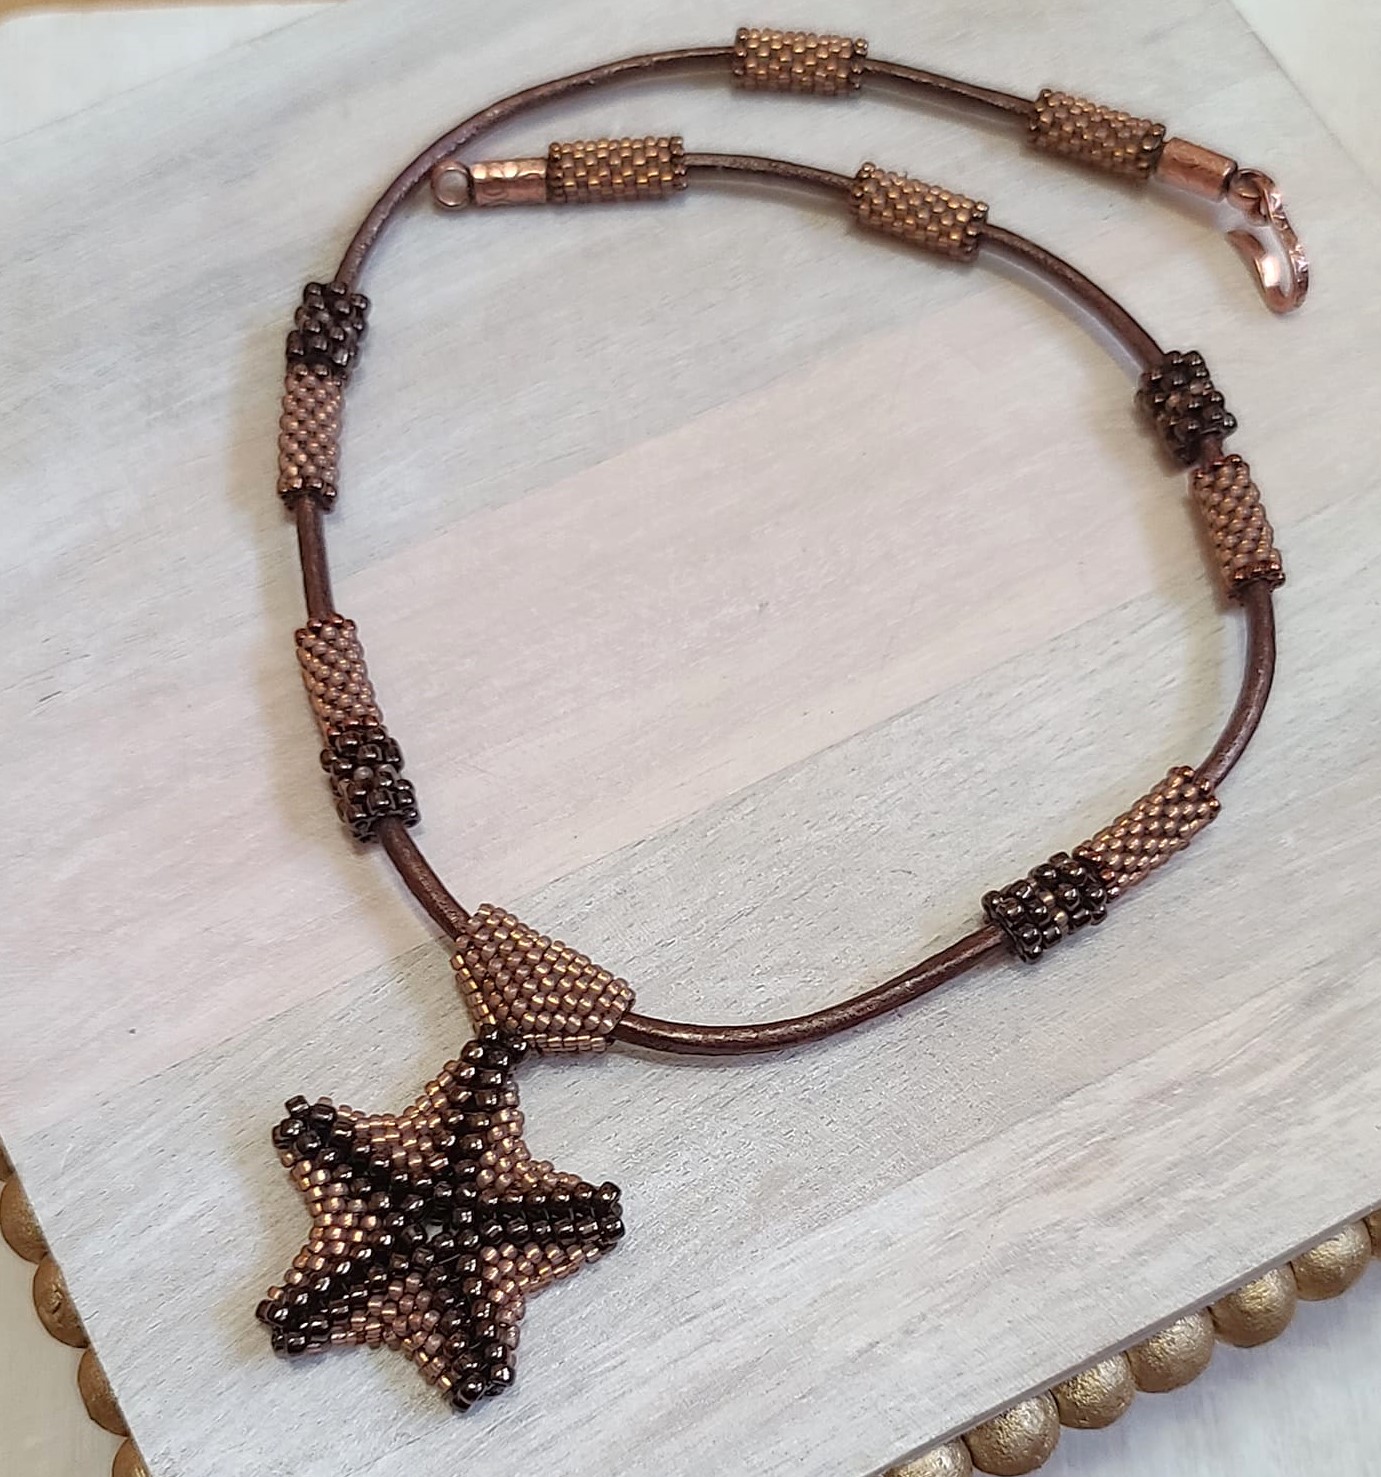 Starfish pendant necklace, handcrafted, miyuki glass and leather